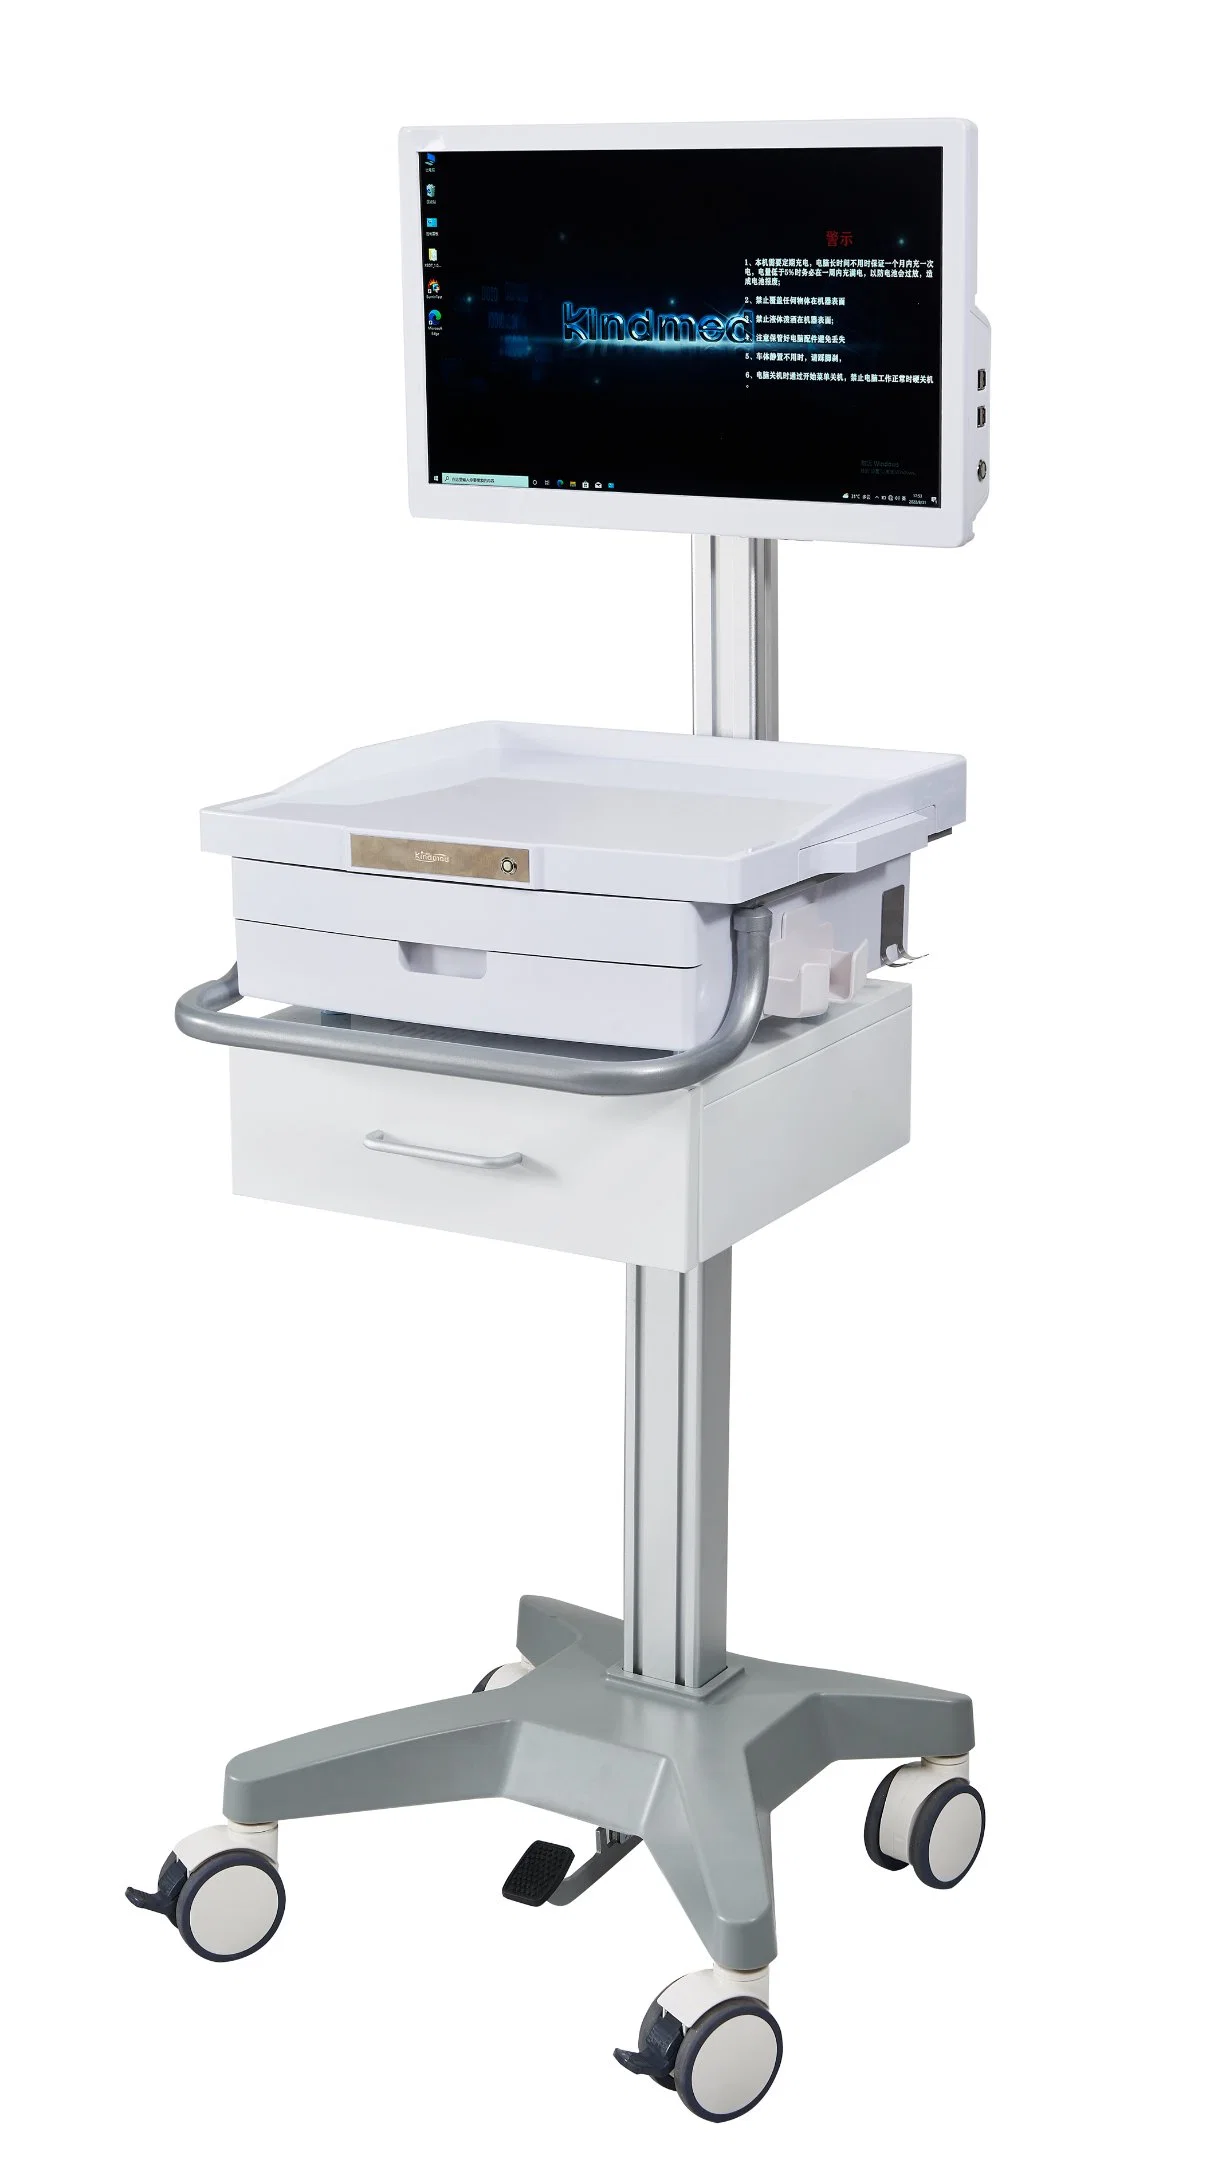 Mobile Battery Powered Telemedicine Cart Workstation with All-in-One Computer for Medical Hospital Furniture- F